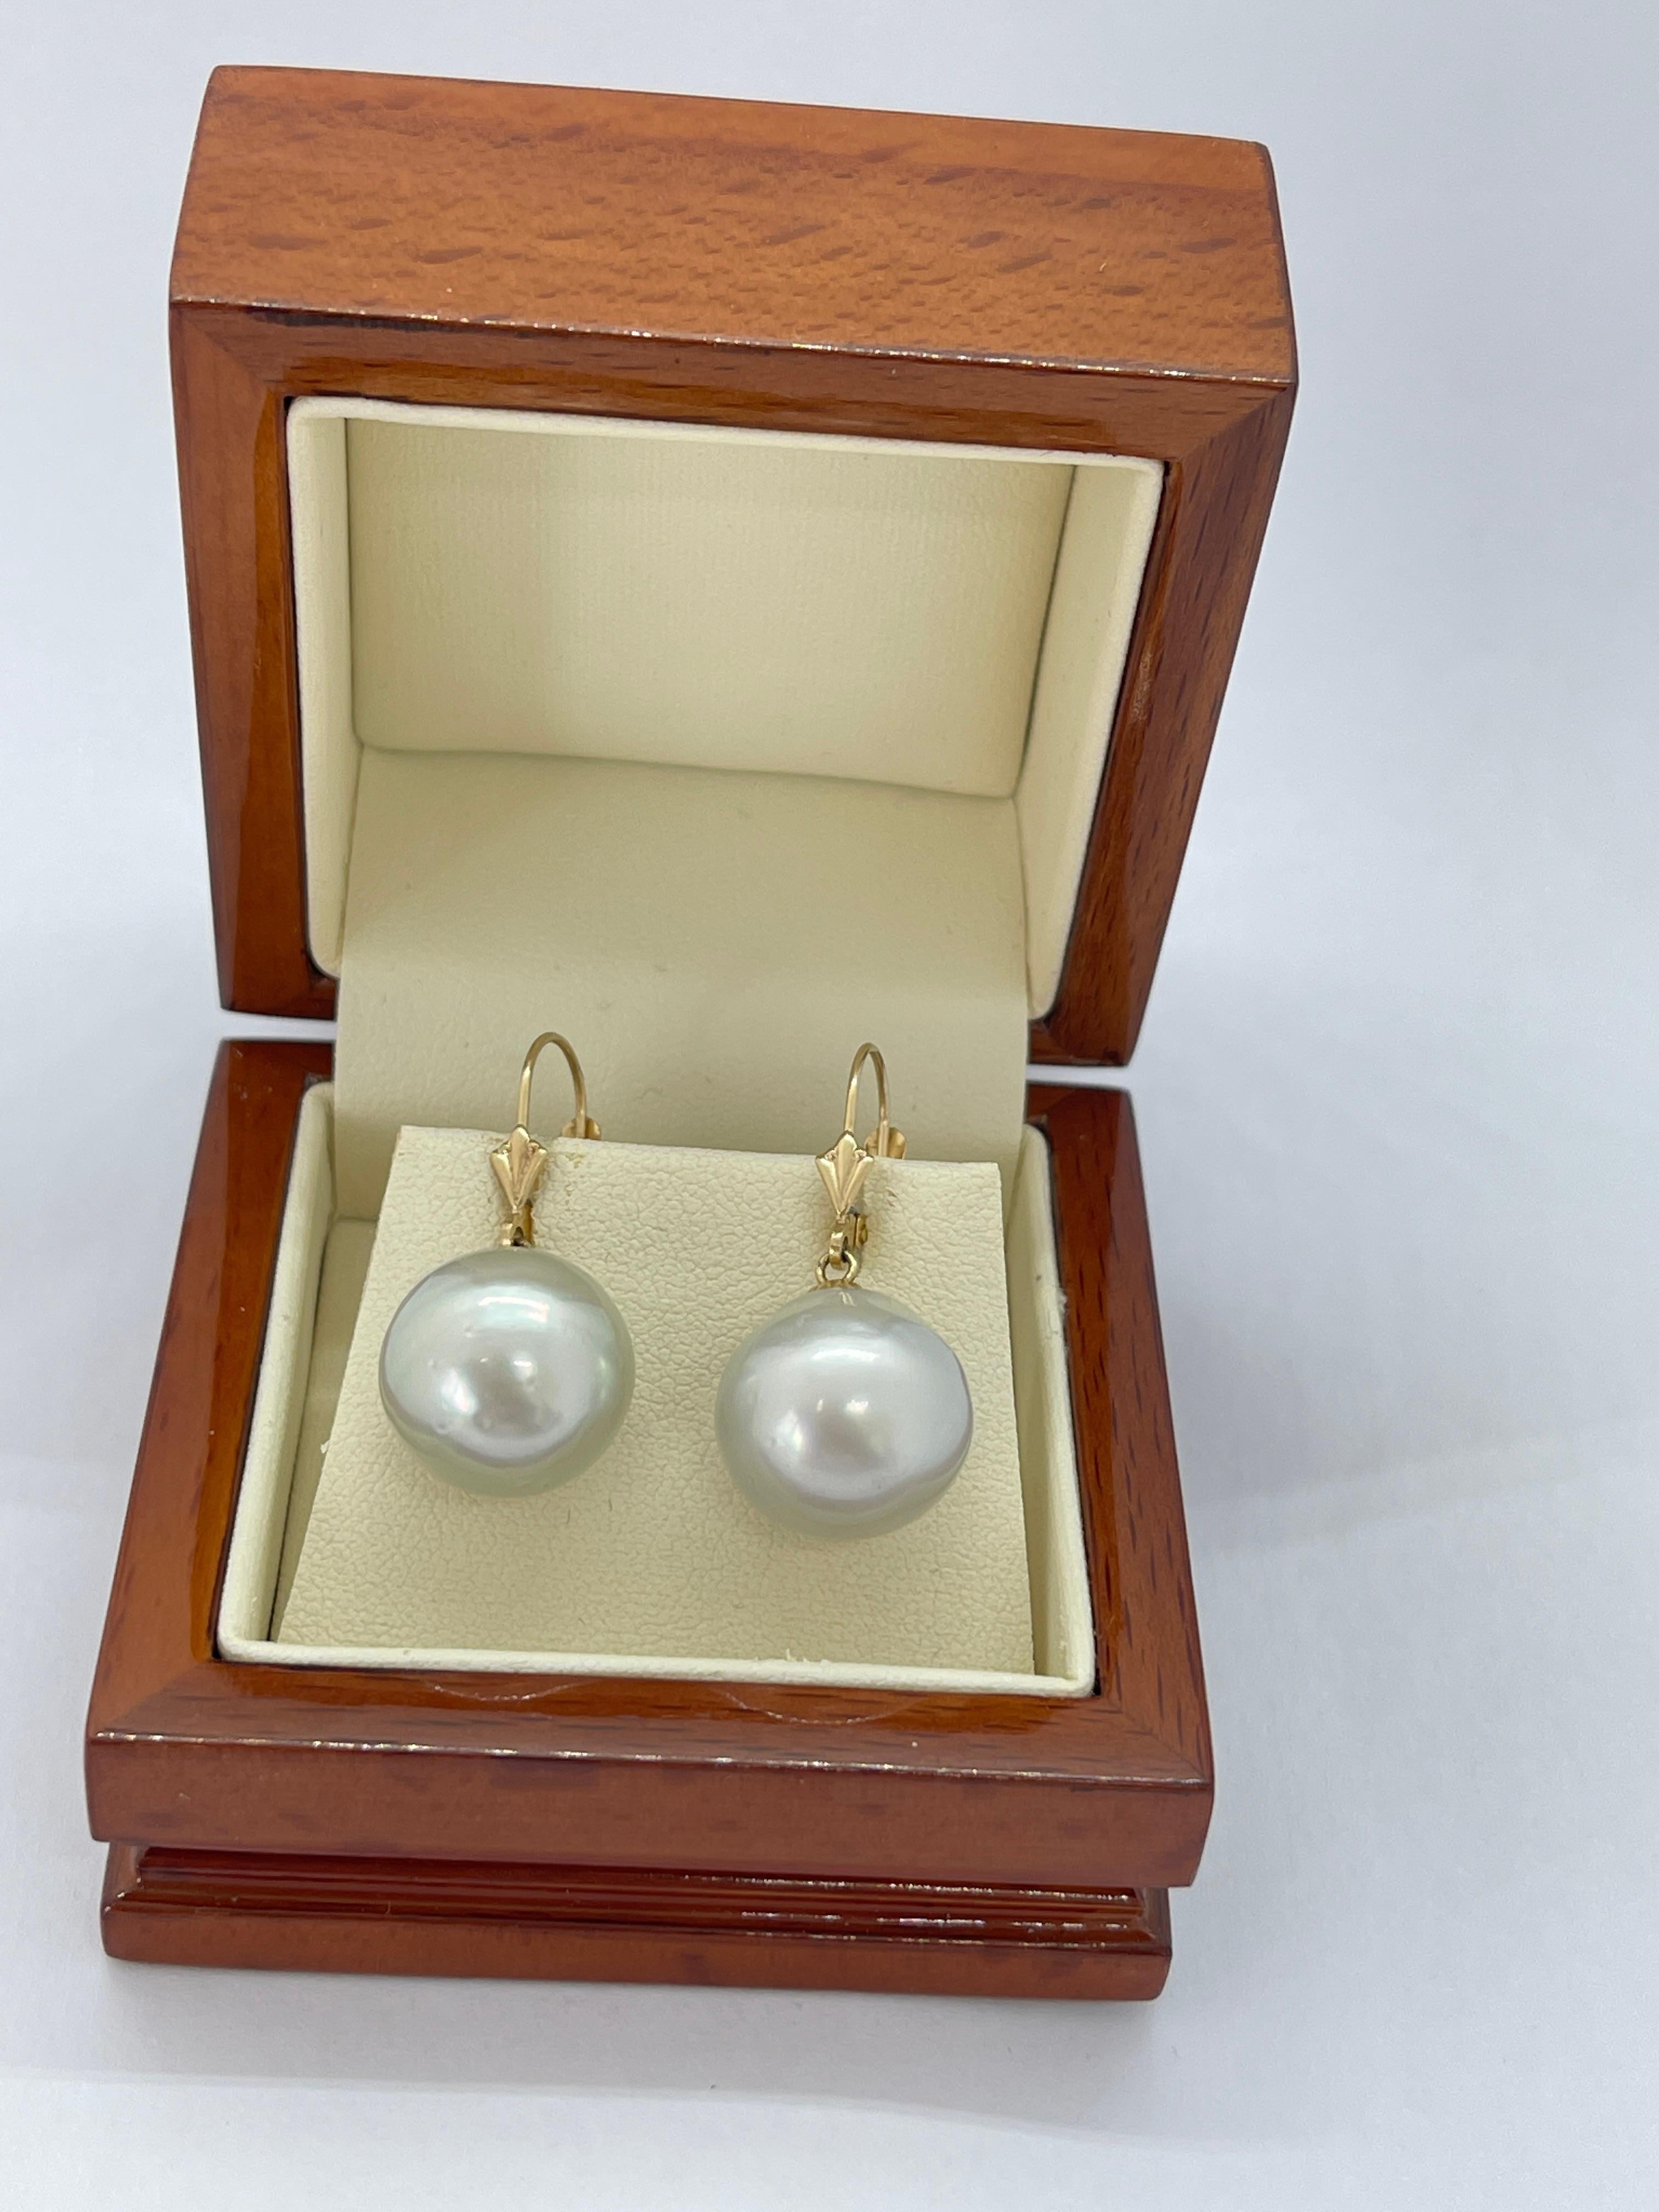 These lovely earrings are a staple for any jewellery collection.  They feature off round cultured pearls that display a silvery-grey hue.  The nacre and lustre are good, however there a some blemishes on each pearl.  One pearl has a small, brownish